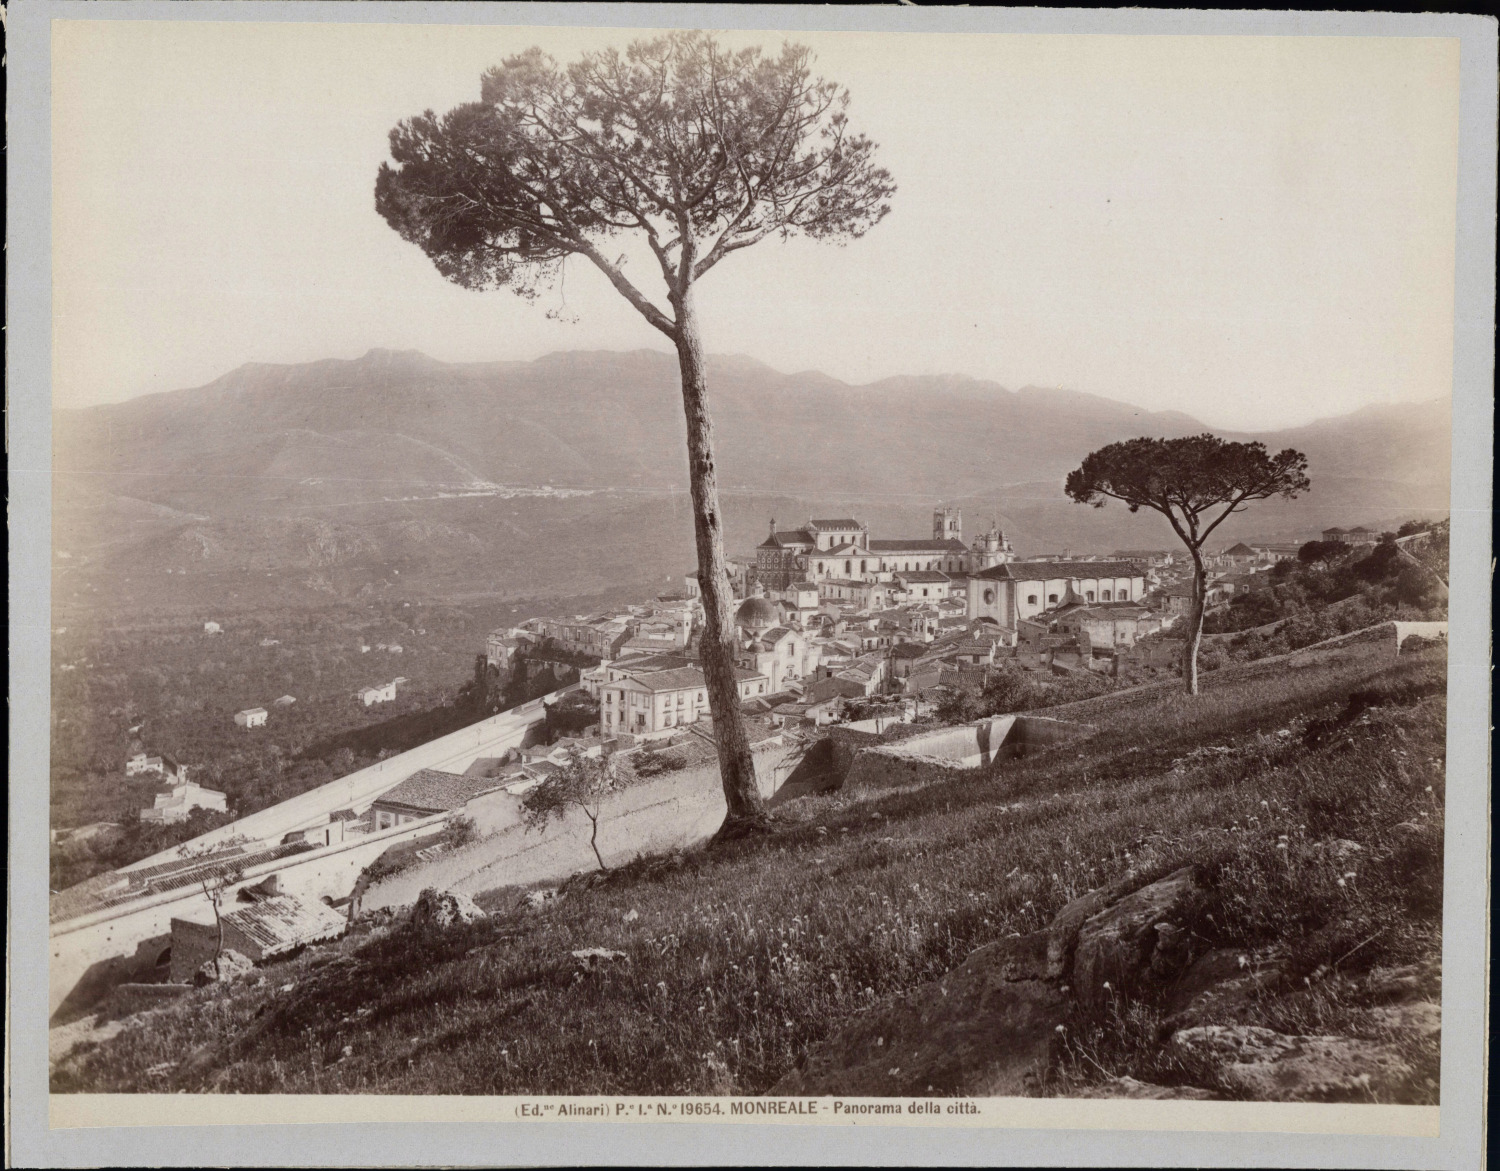 Italy, Sicily, Monreale, Panorama of the city, ca.1875, vintage albumin print